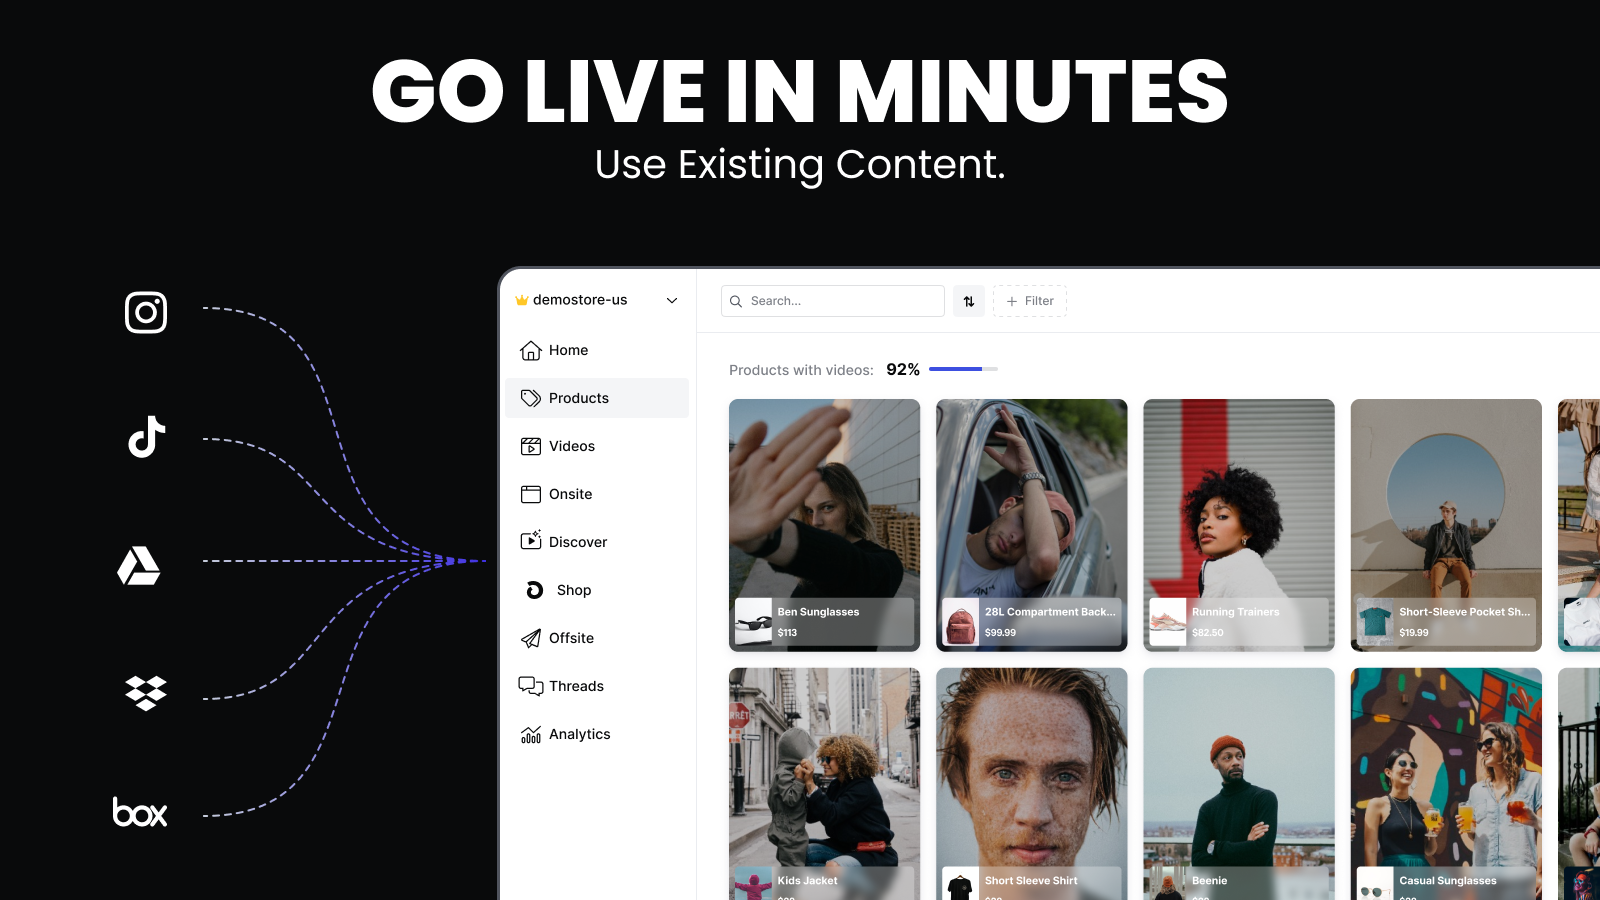 Go live in minutes using existing content